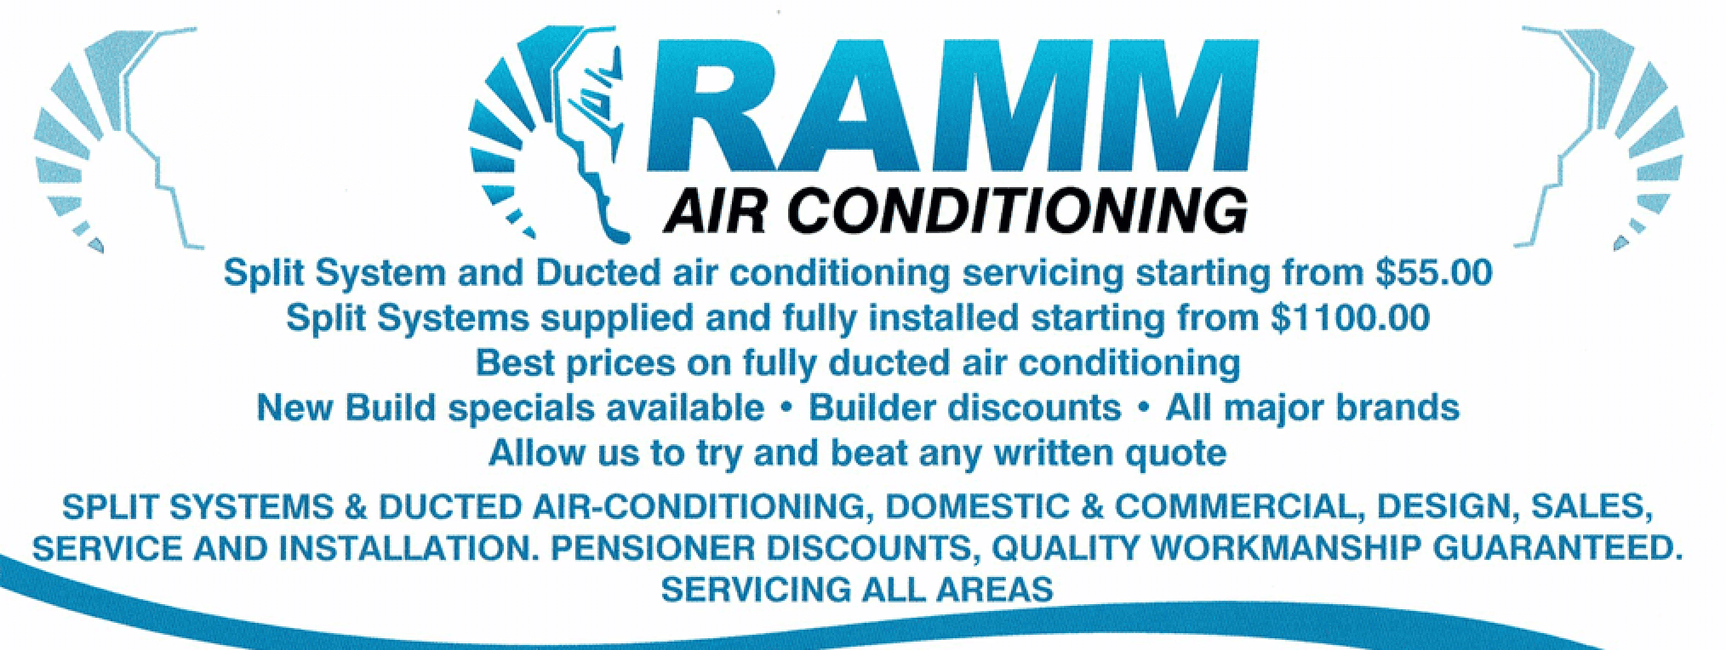 Ramm Air Conditioning featured image